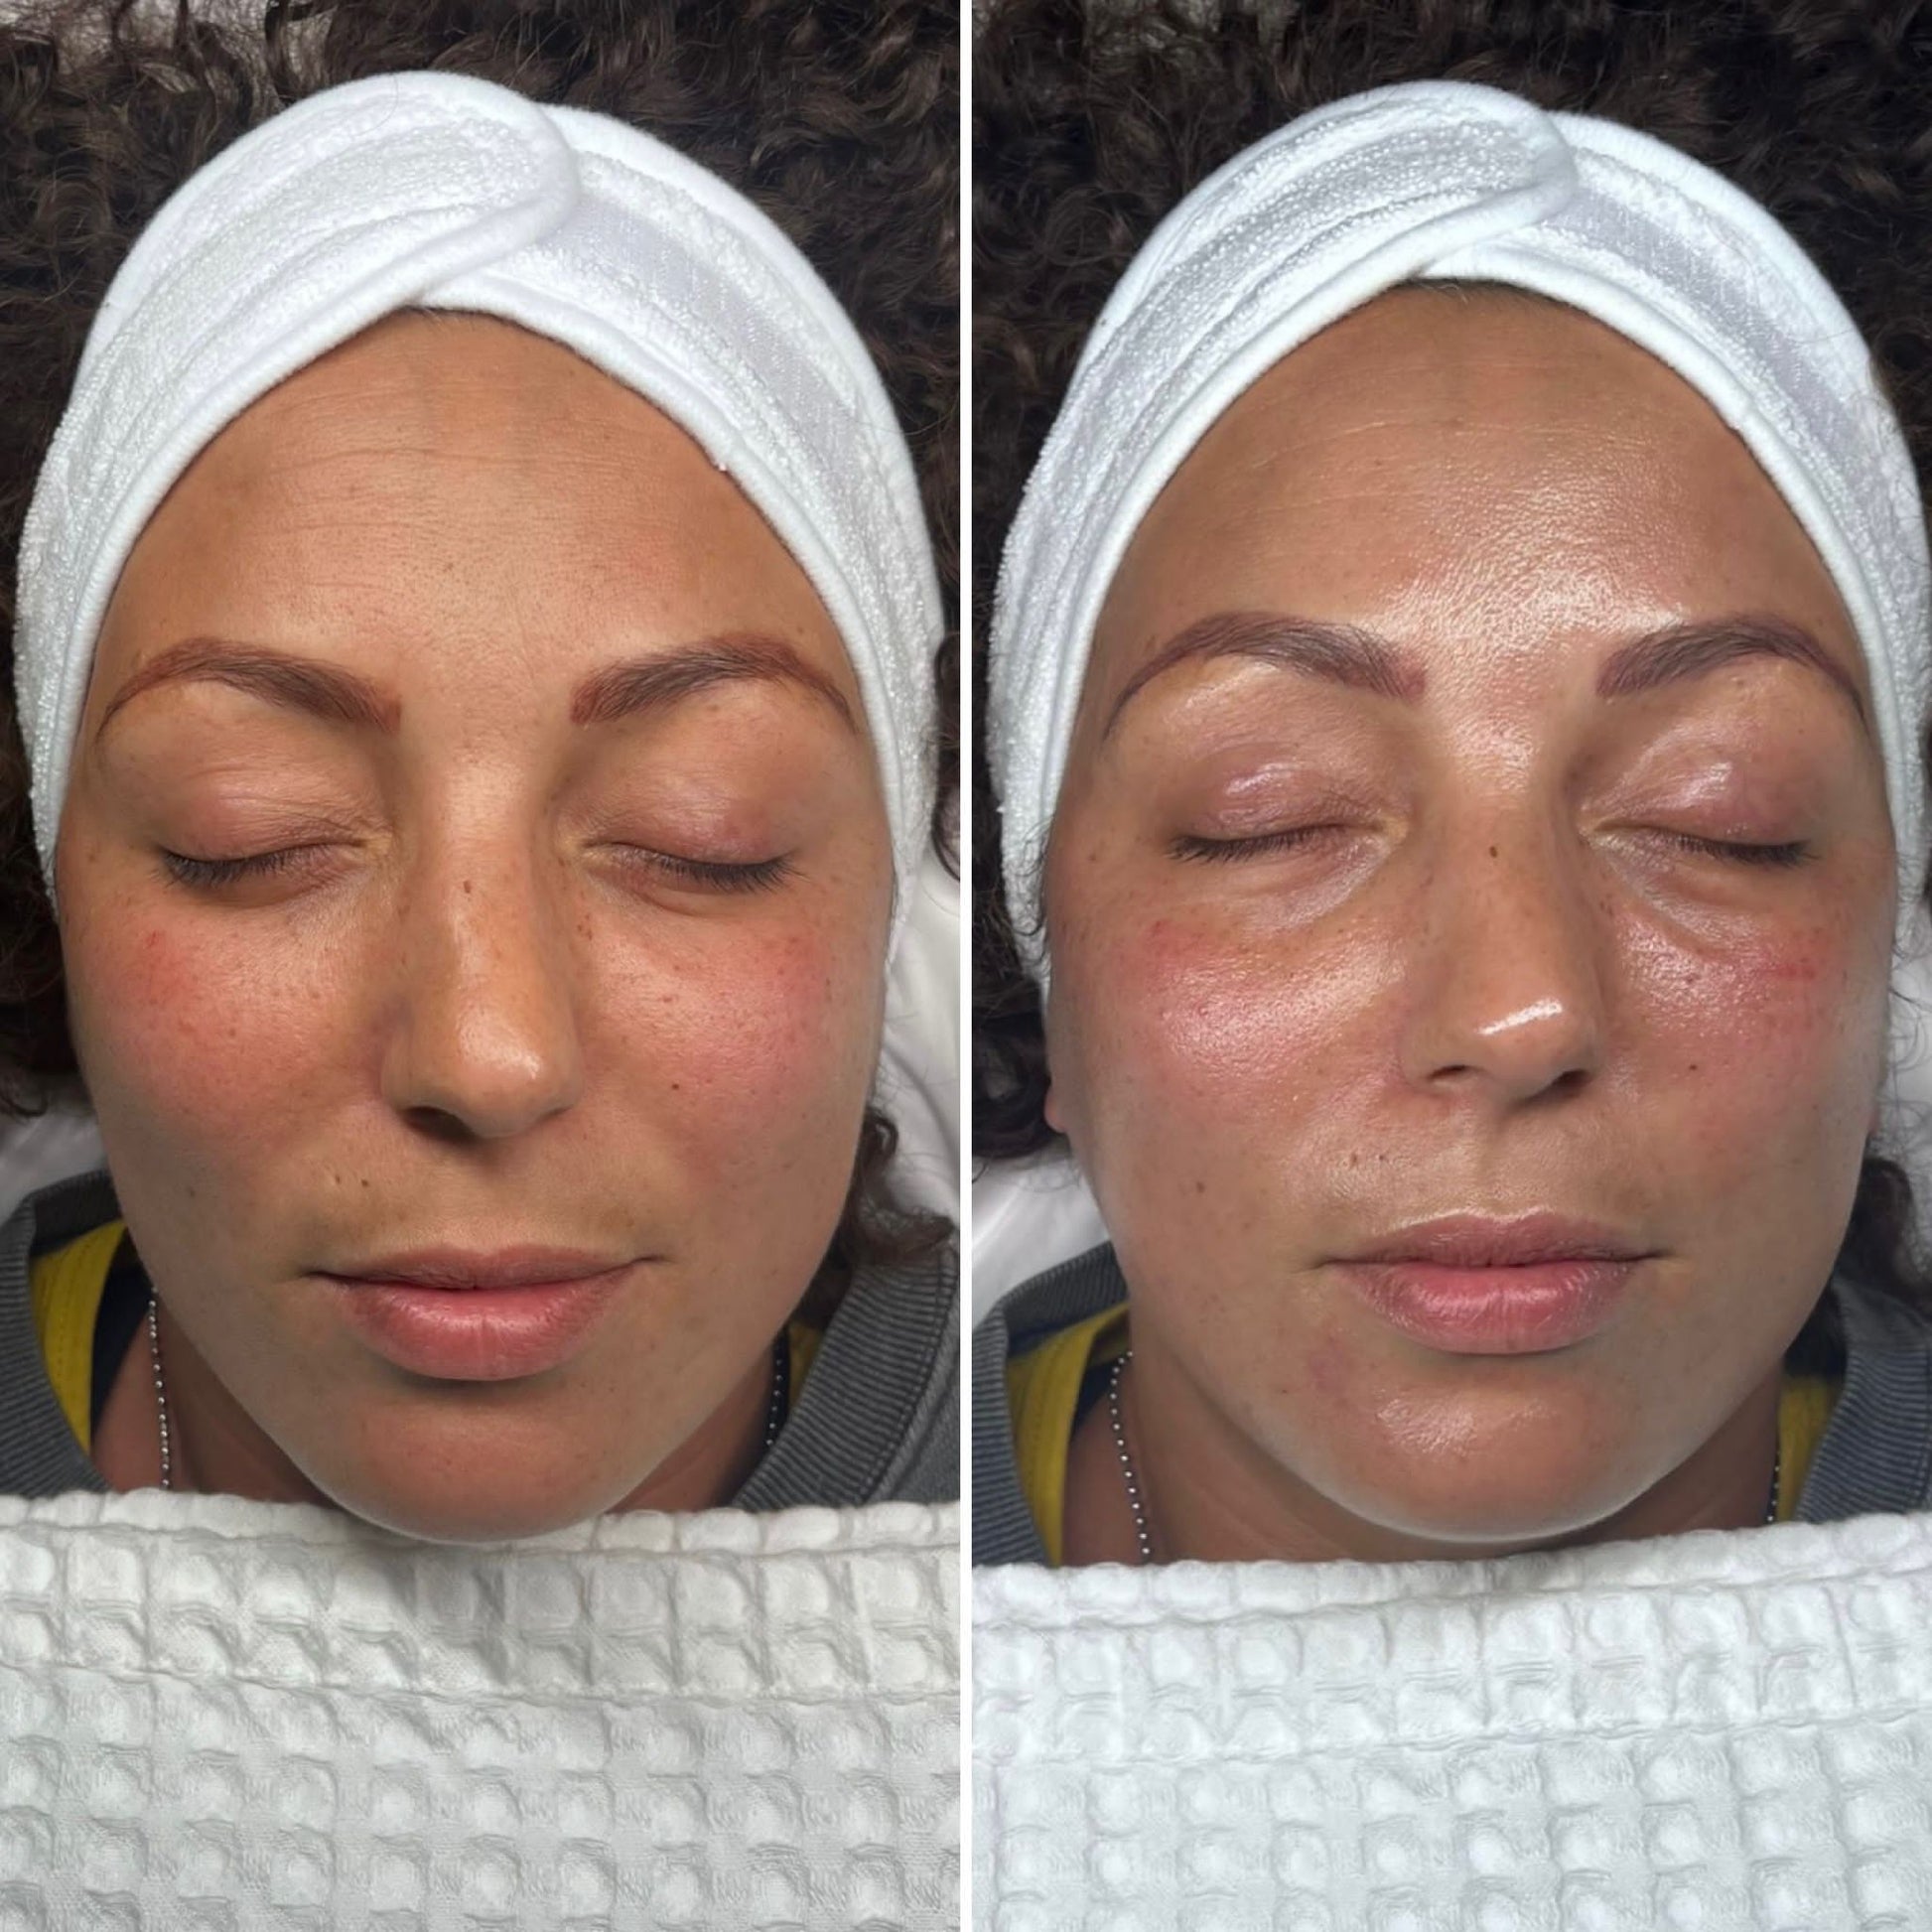 hydrafacial boost before and after skin treatment